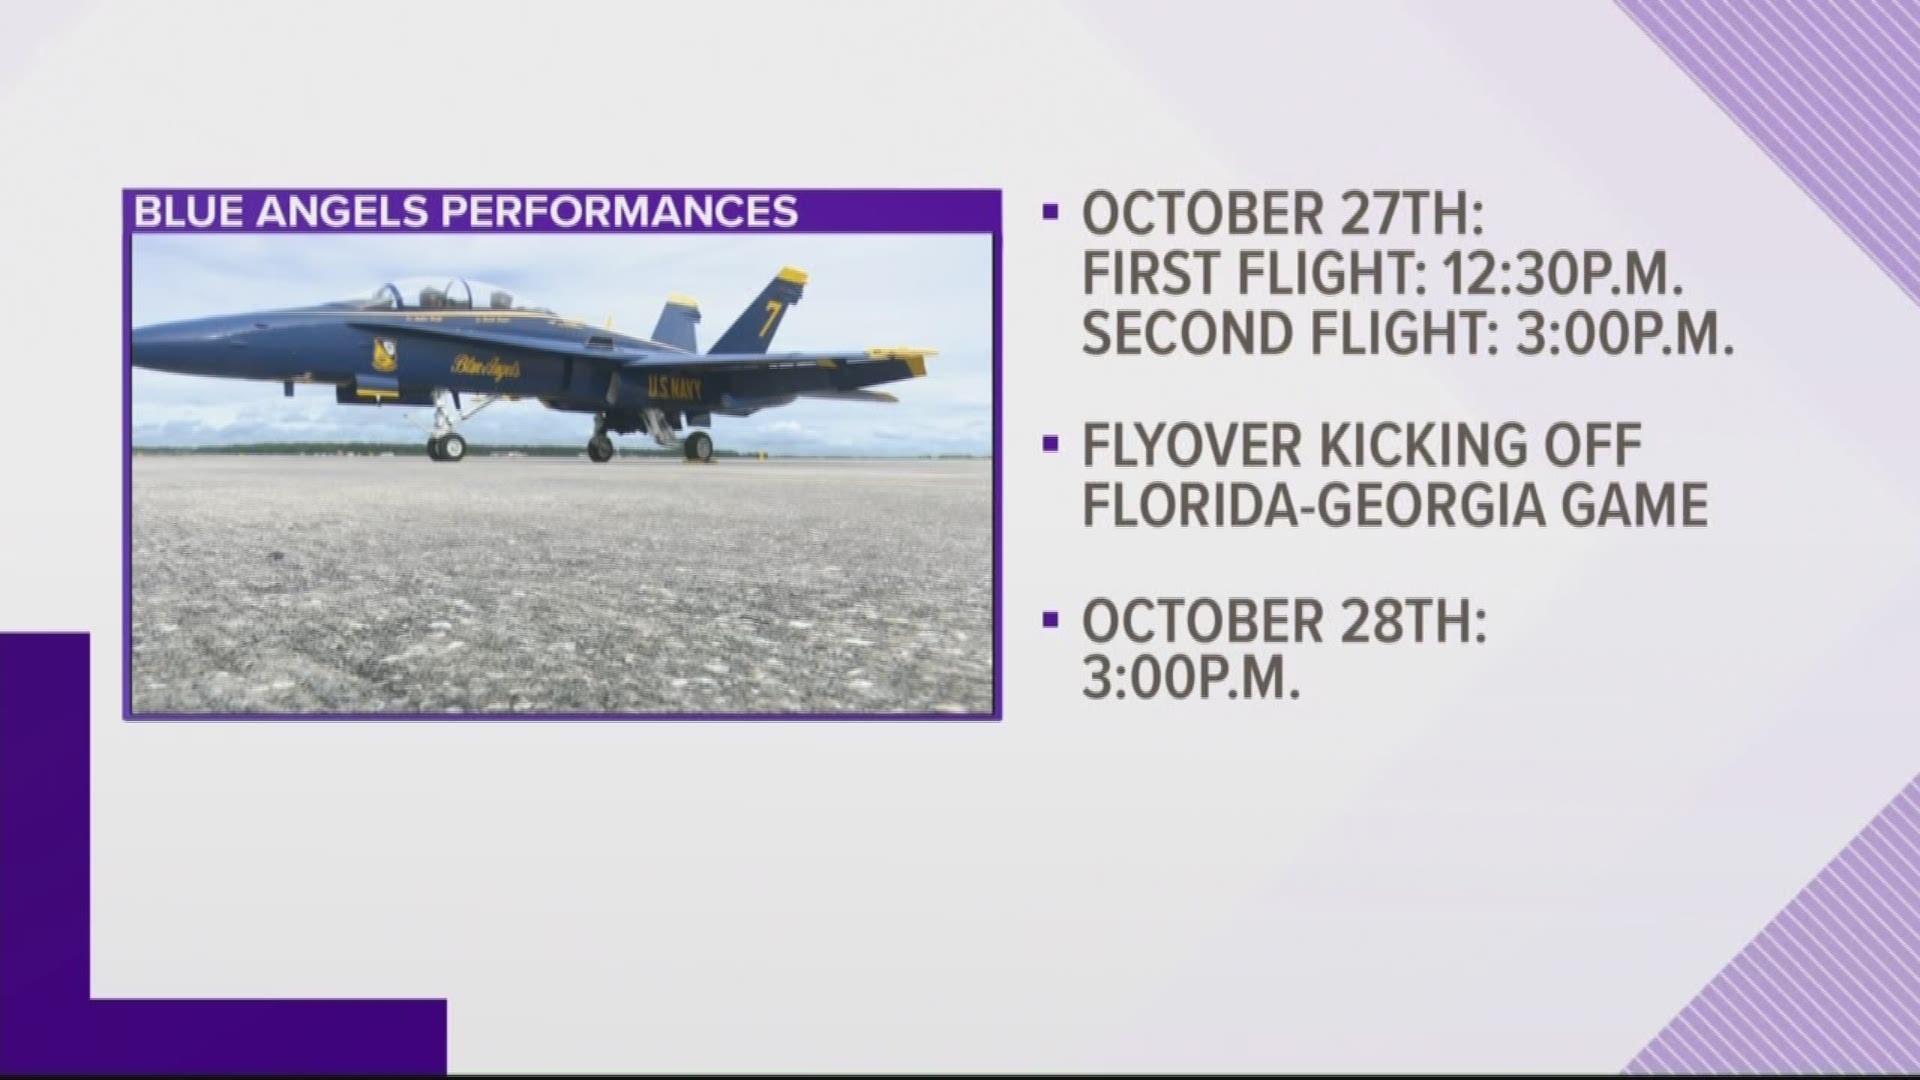 The Blue Angels will be headlining the event. They will fly Saturday at 12:30 p.m. and again at 3 p.m. after conducting a flyover to kickoff the Florida-Georgia game.